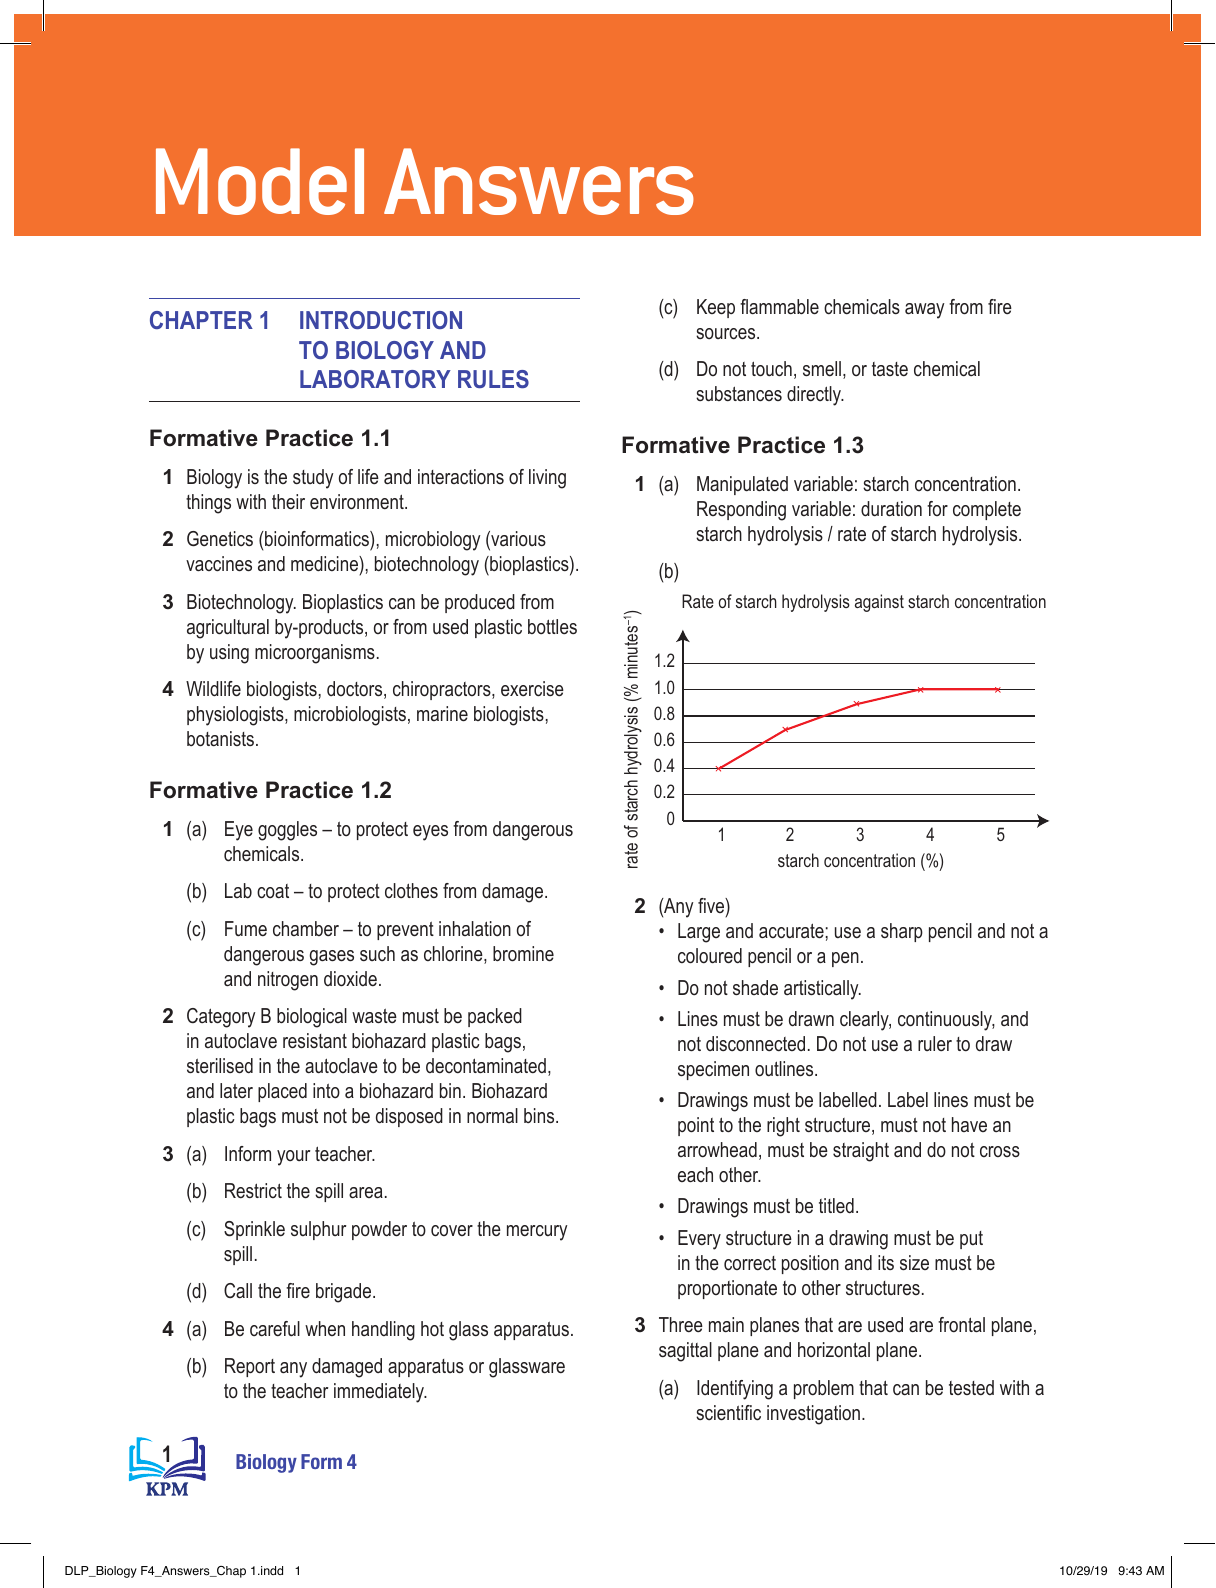 Science textbook form 3 formative practice answer